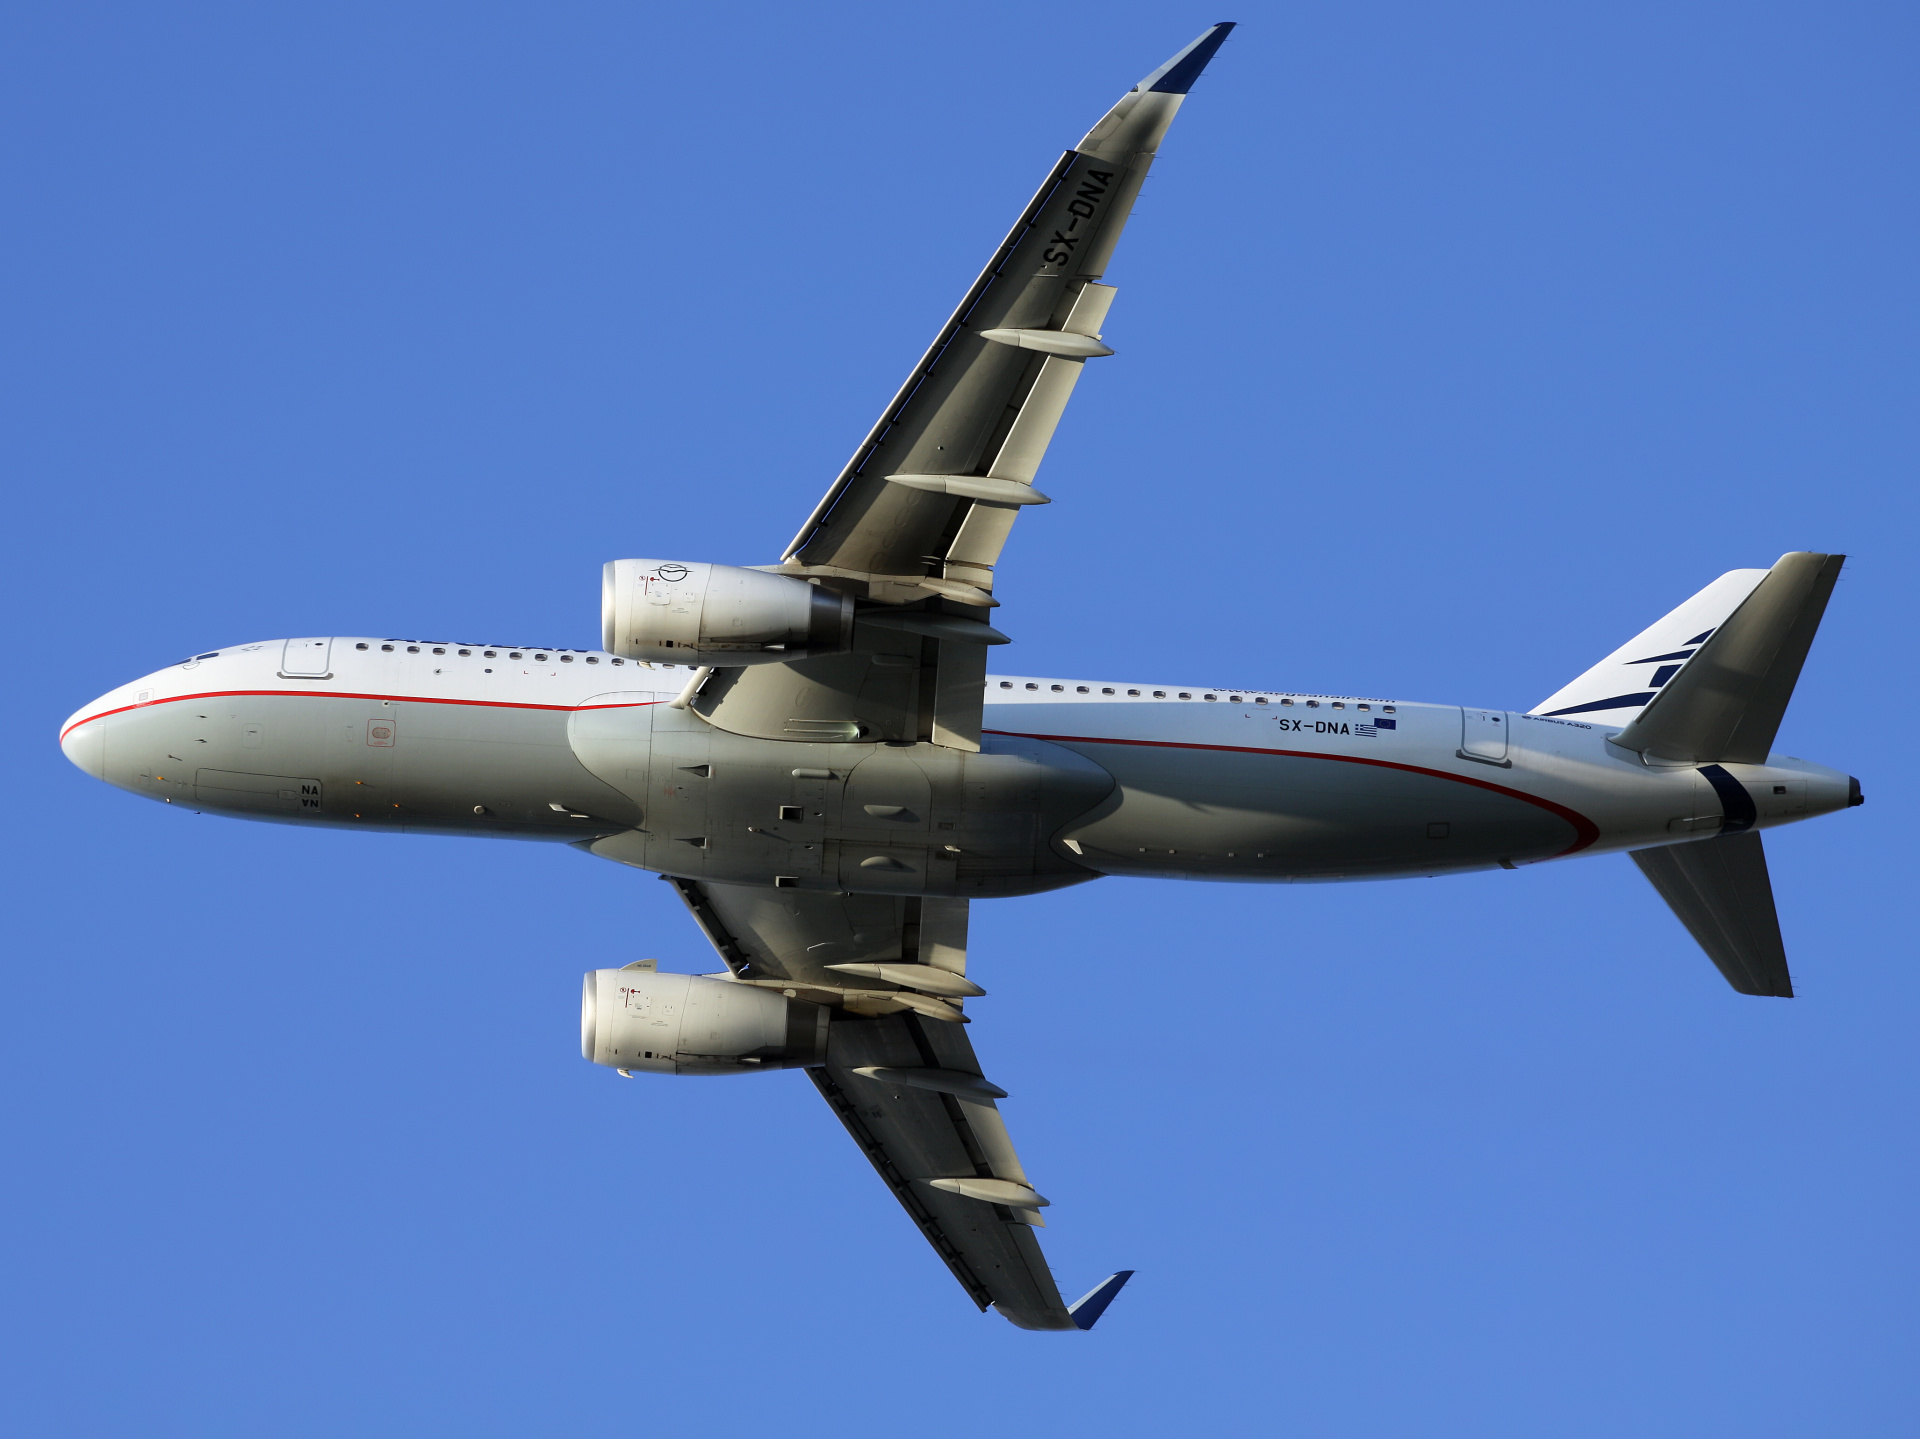 SX-DNA (Samoloty » Spotting na EPWA » Airbus A320-200 » Aegean Airlines)